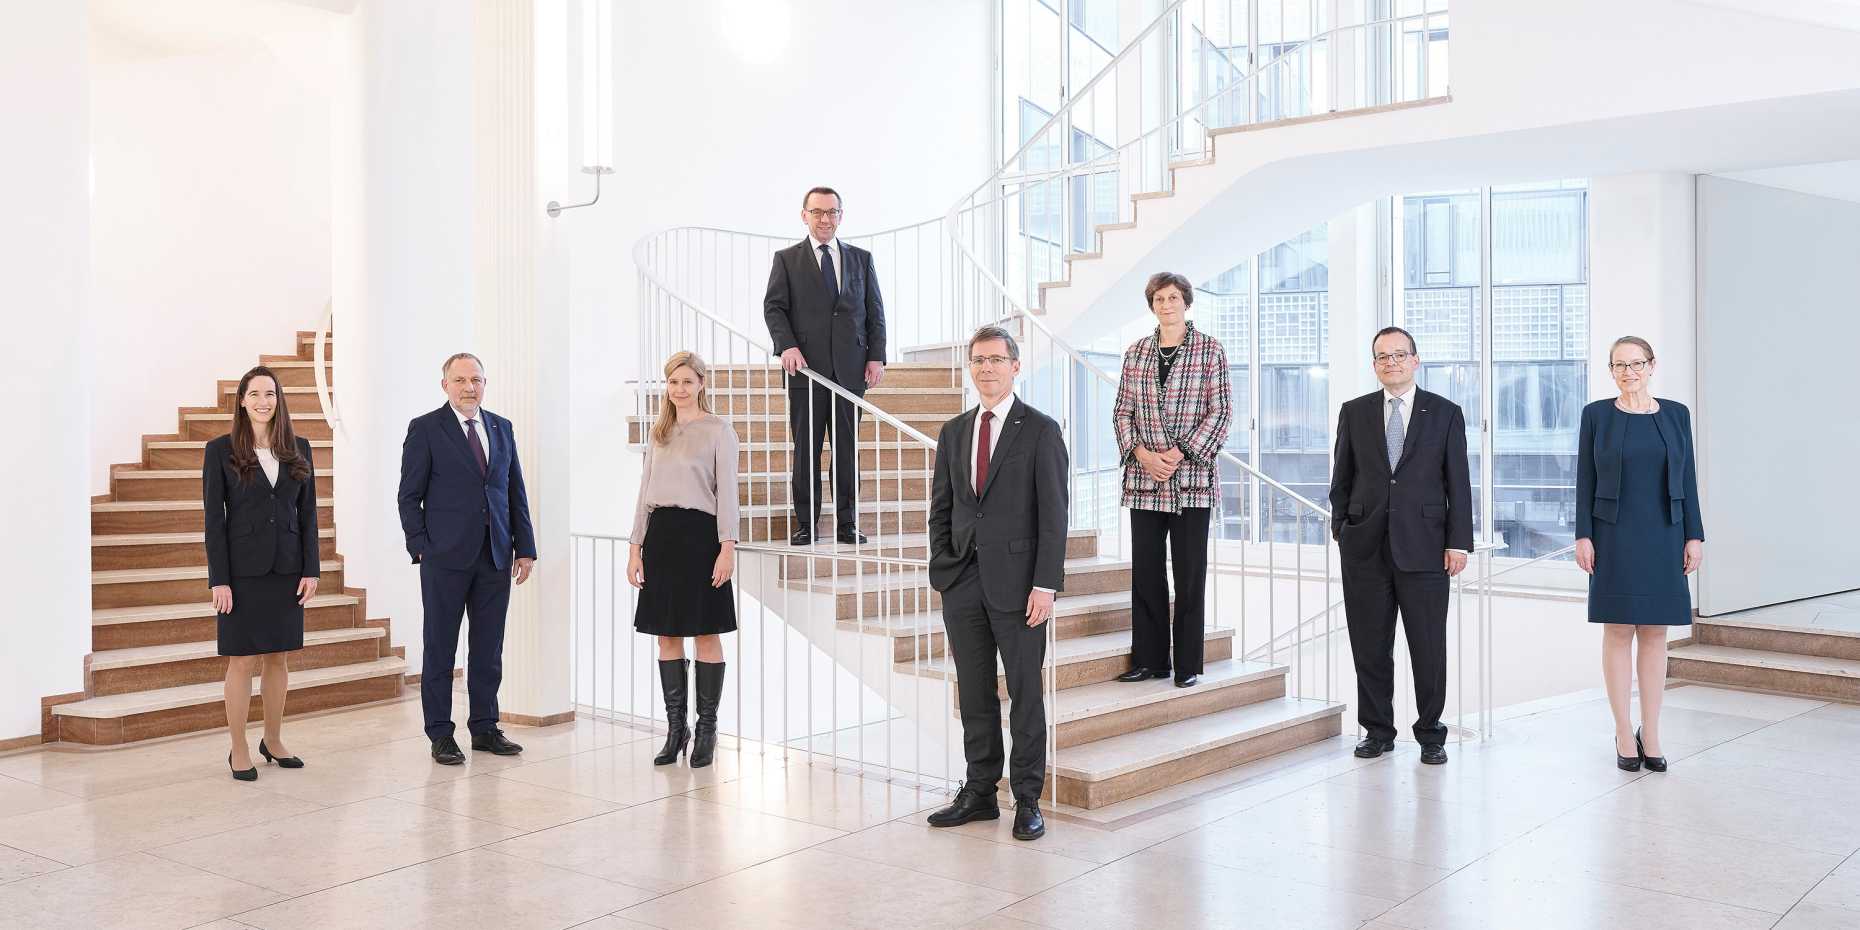 Enlarged view: The first outwardly visible result of the rETHink project is the expansion of the Executive Board to include Vice Presidents for Knowledge Transfer and Corporate Relations, and Personnel Development and Leadership. Members of the Executive Board, from left to right: Vanessa Wood (new, from 1 January 2021), Detlef Günther, Julia Dannath-Schuh (new), Ulrich Weidmann, Joël Mesot, Sarah Springman and Robert Perich. Far right: Secretary General Katharina Poiger Ruloff.